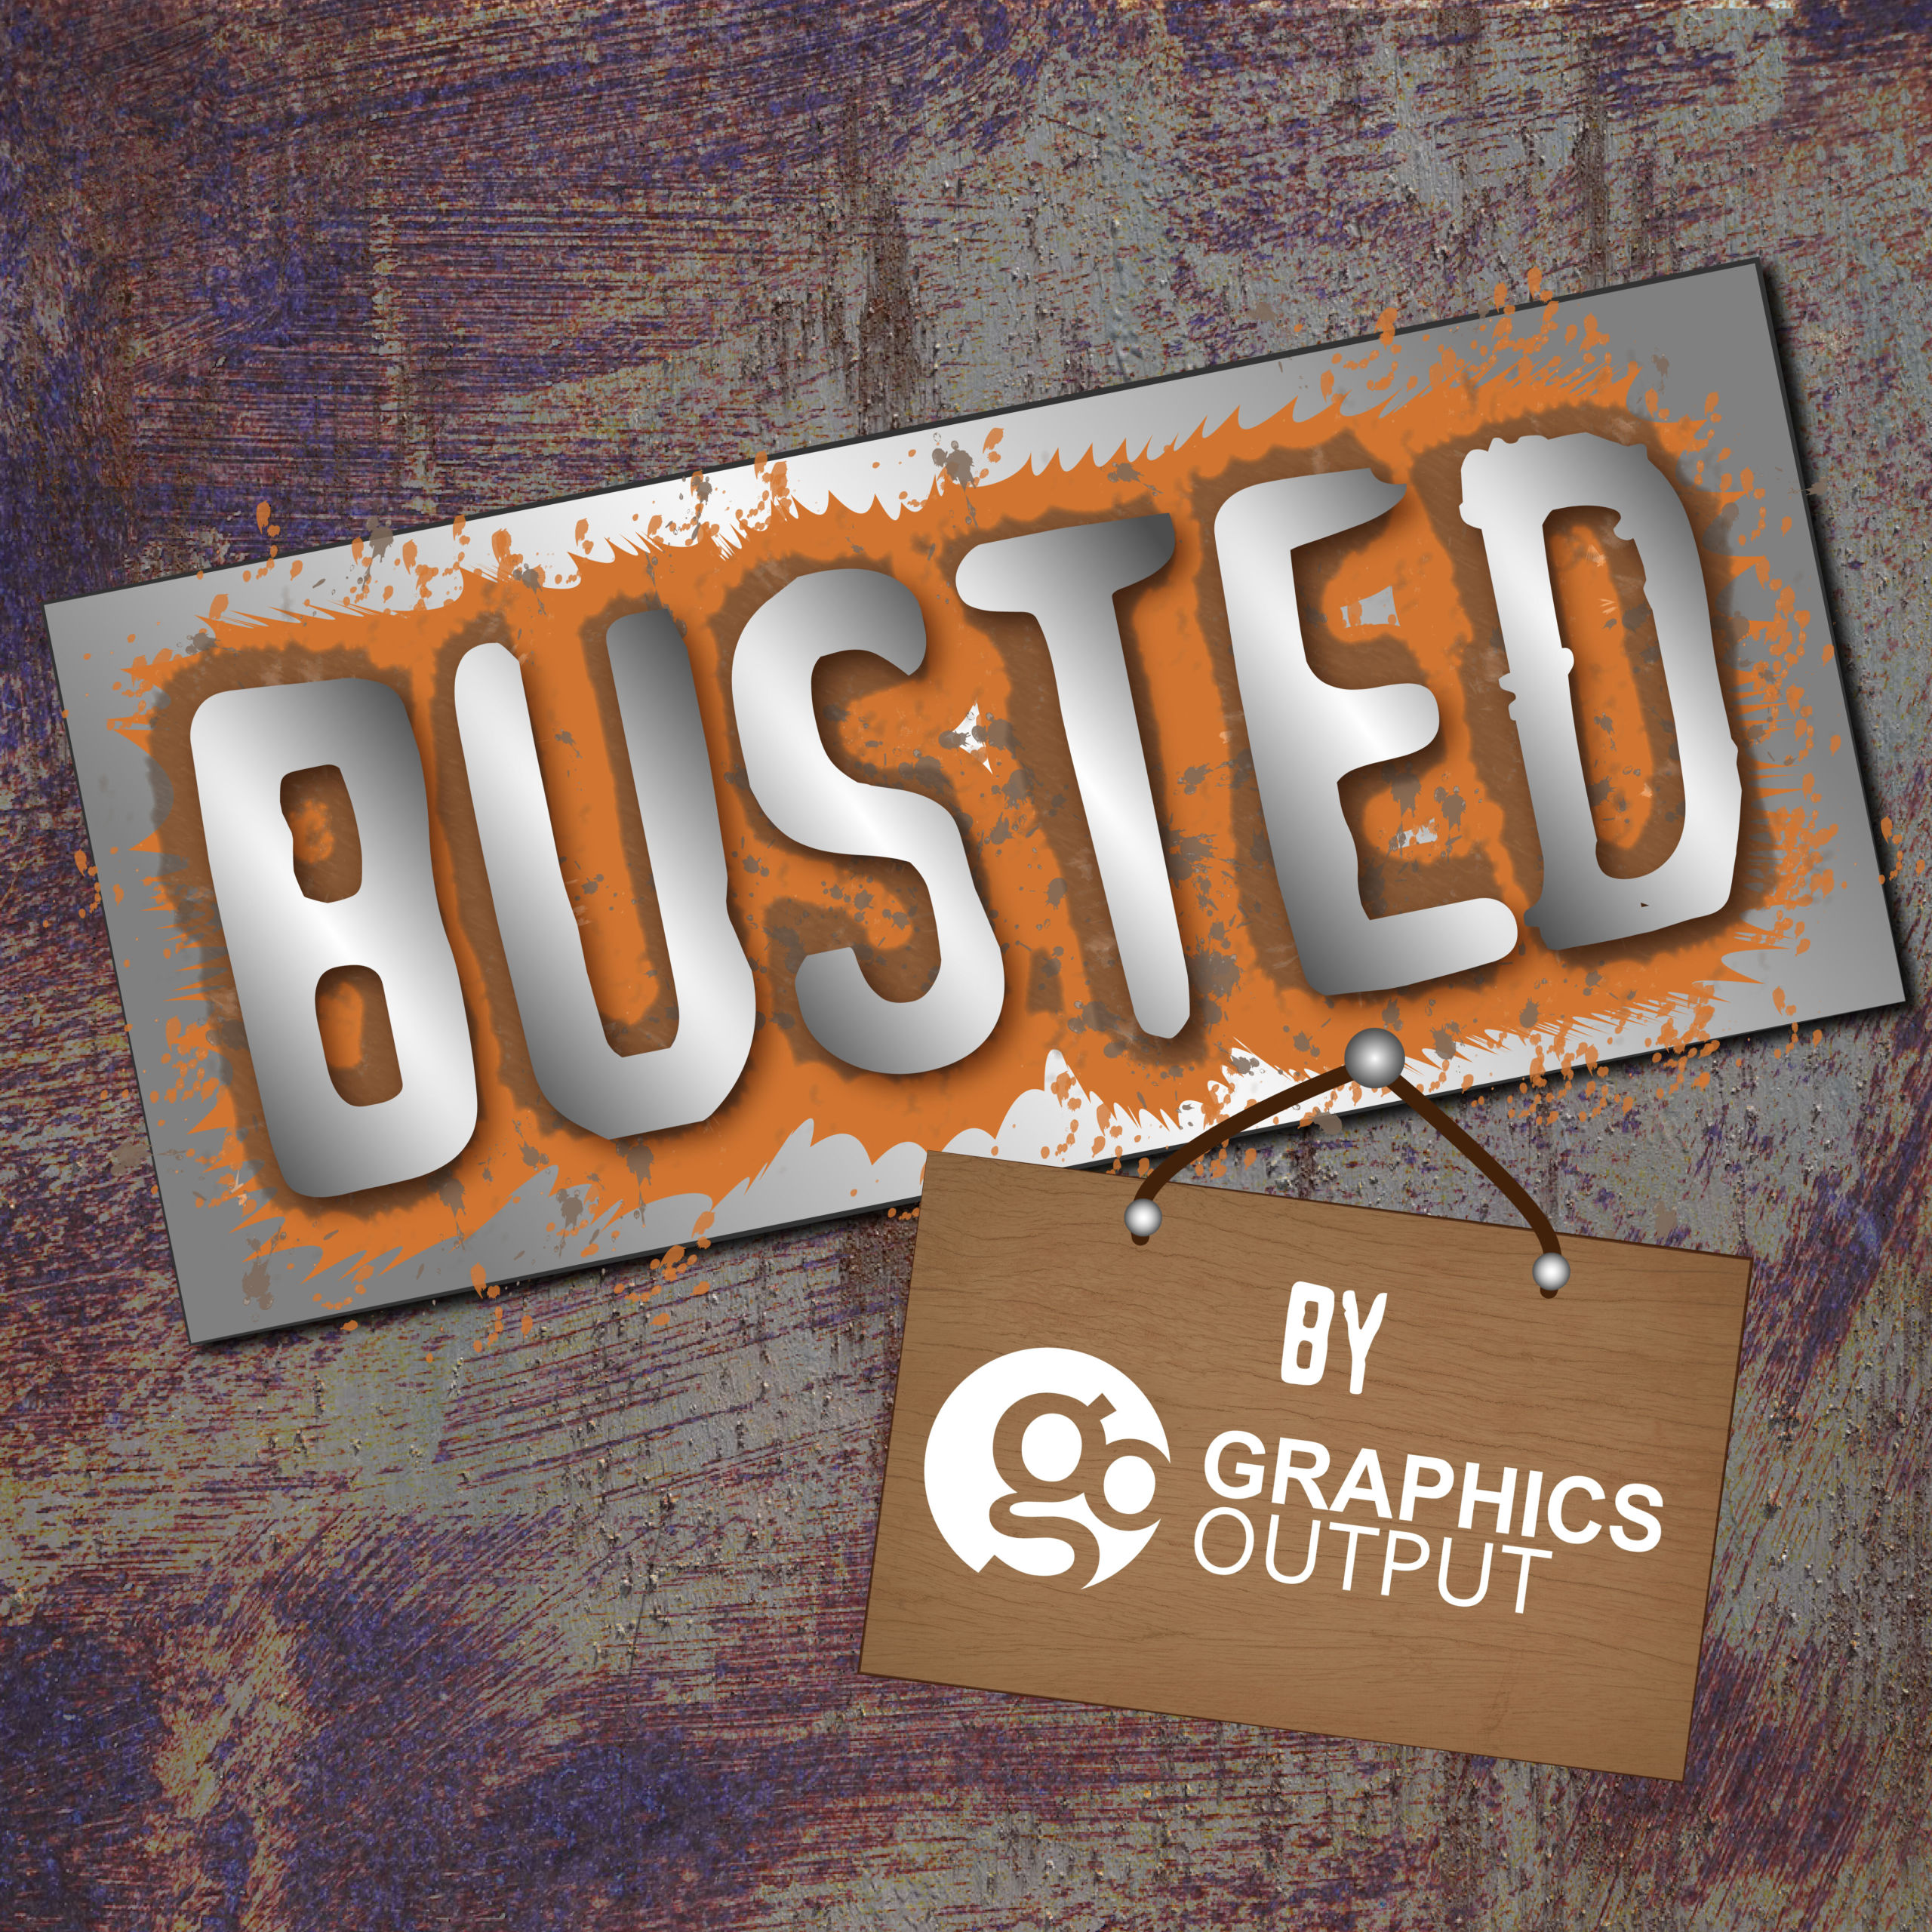 BUSTED Mythbusters Logo with Graphics Output logo on sign